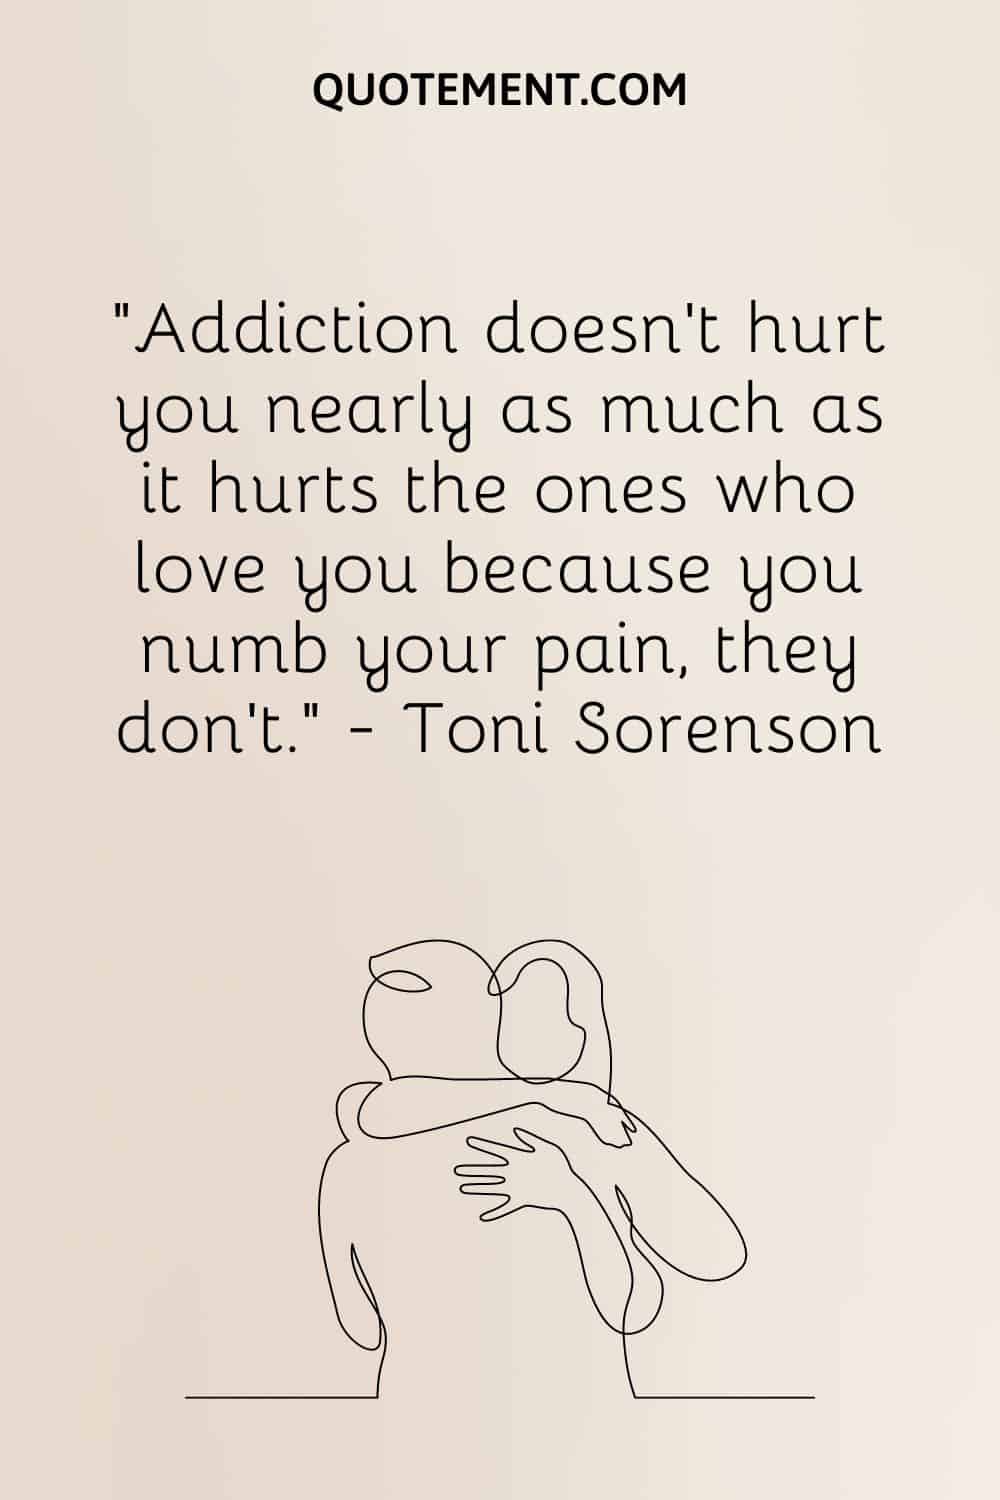 Addiction doesn’t hurt you nearly as much as it hurts the ones who love you because you numb your pain, they don’t